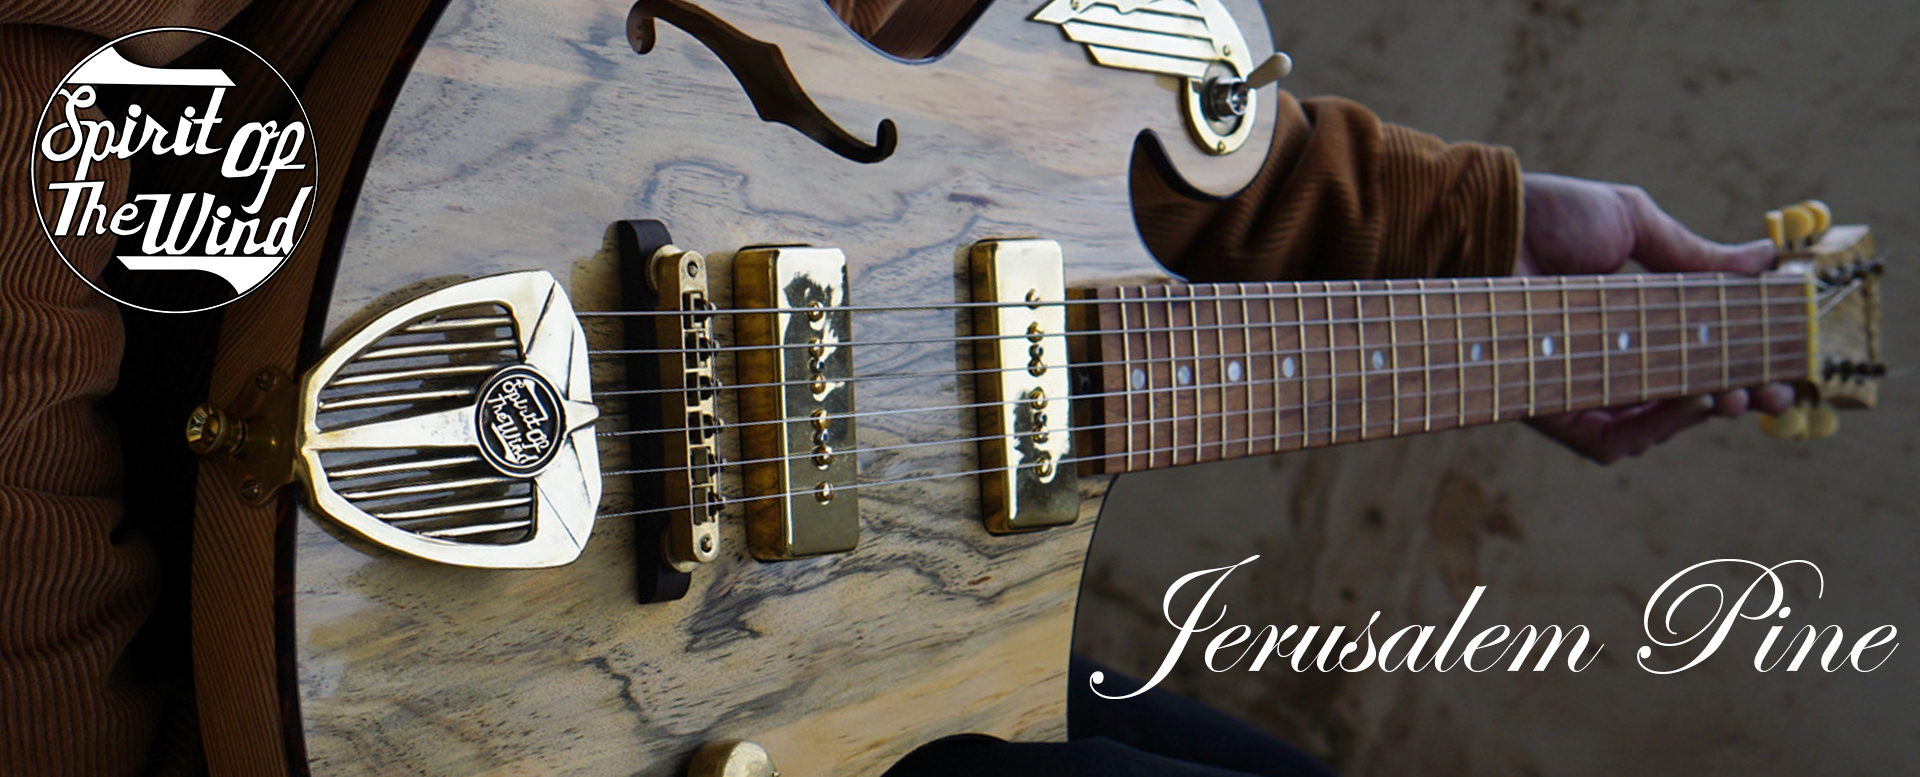 Handmade Guitar made from Jerusalem Pine - Spirit of the Wind by Tone Revival Guitars